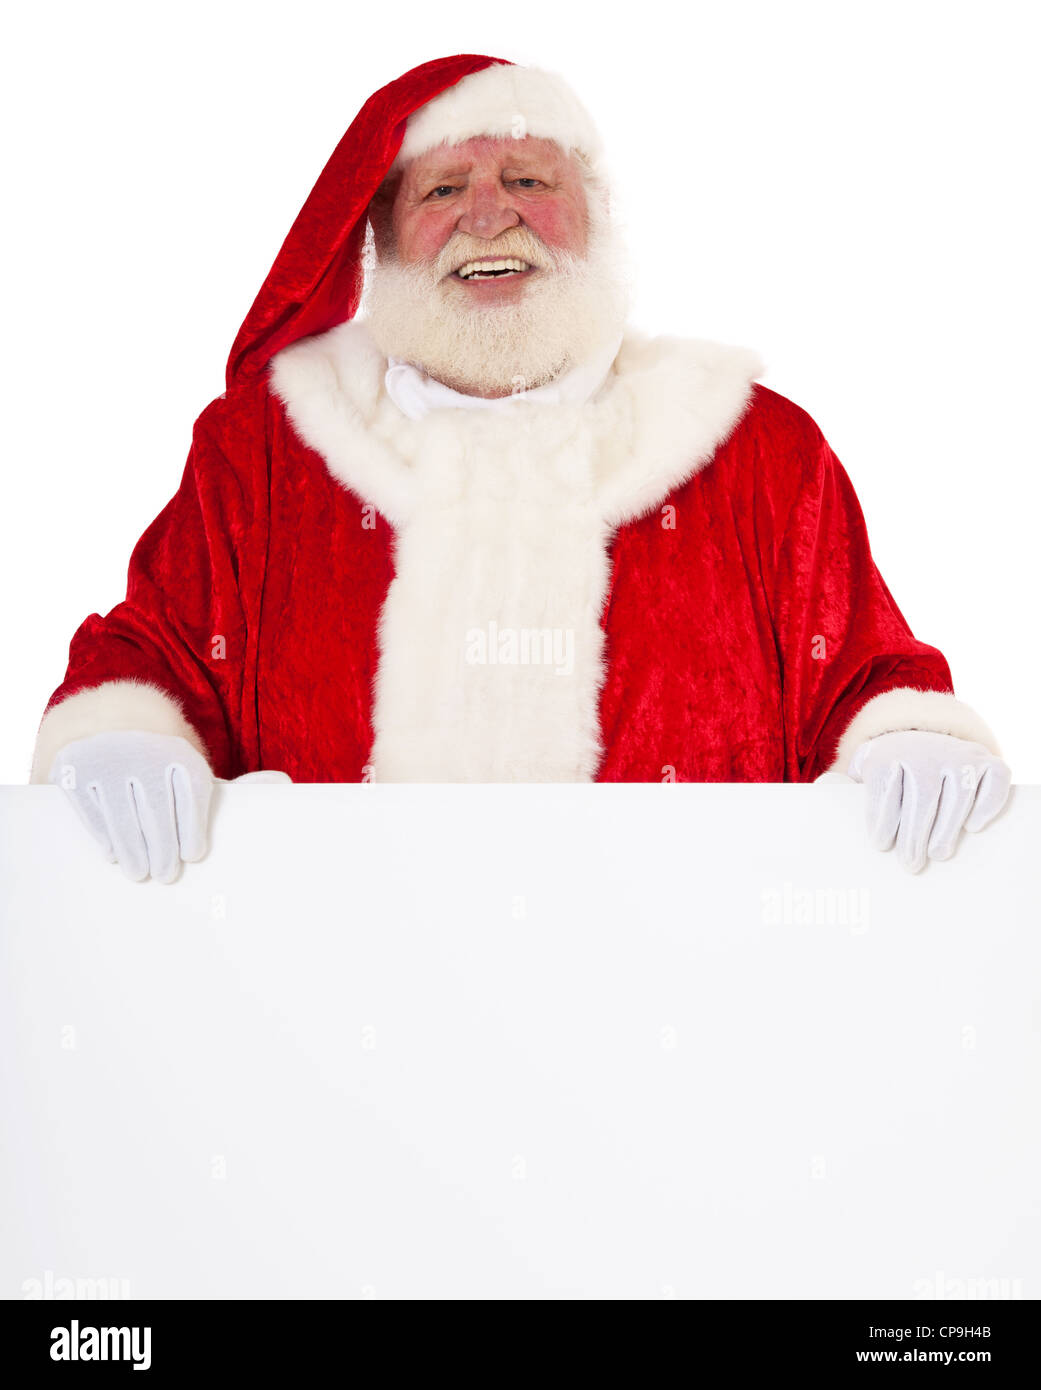 Santa Claus in authentic look behind blank white sign. All on white background. Stock Photo